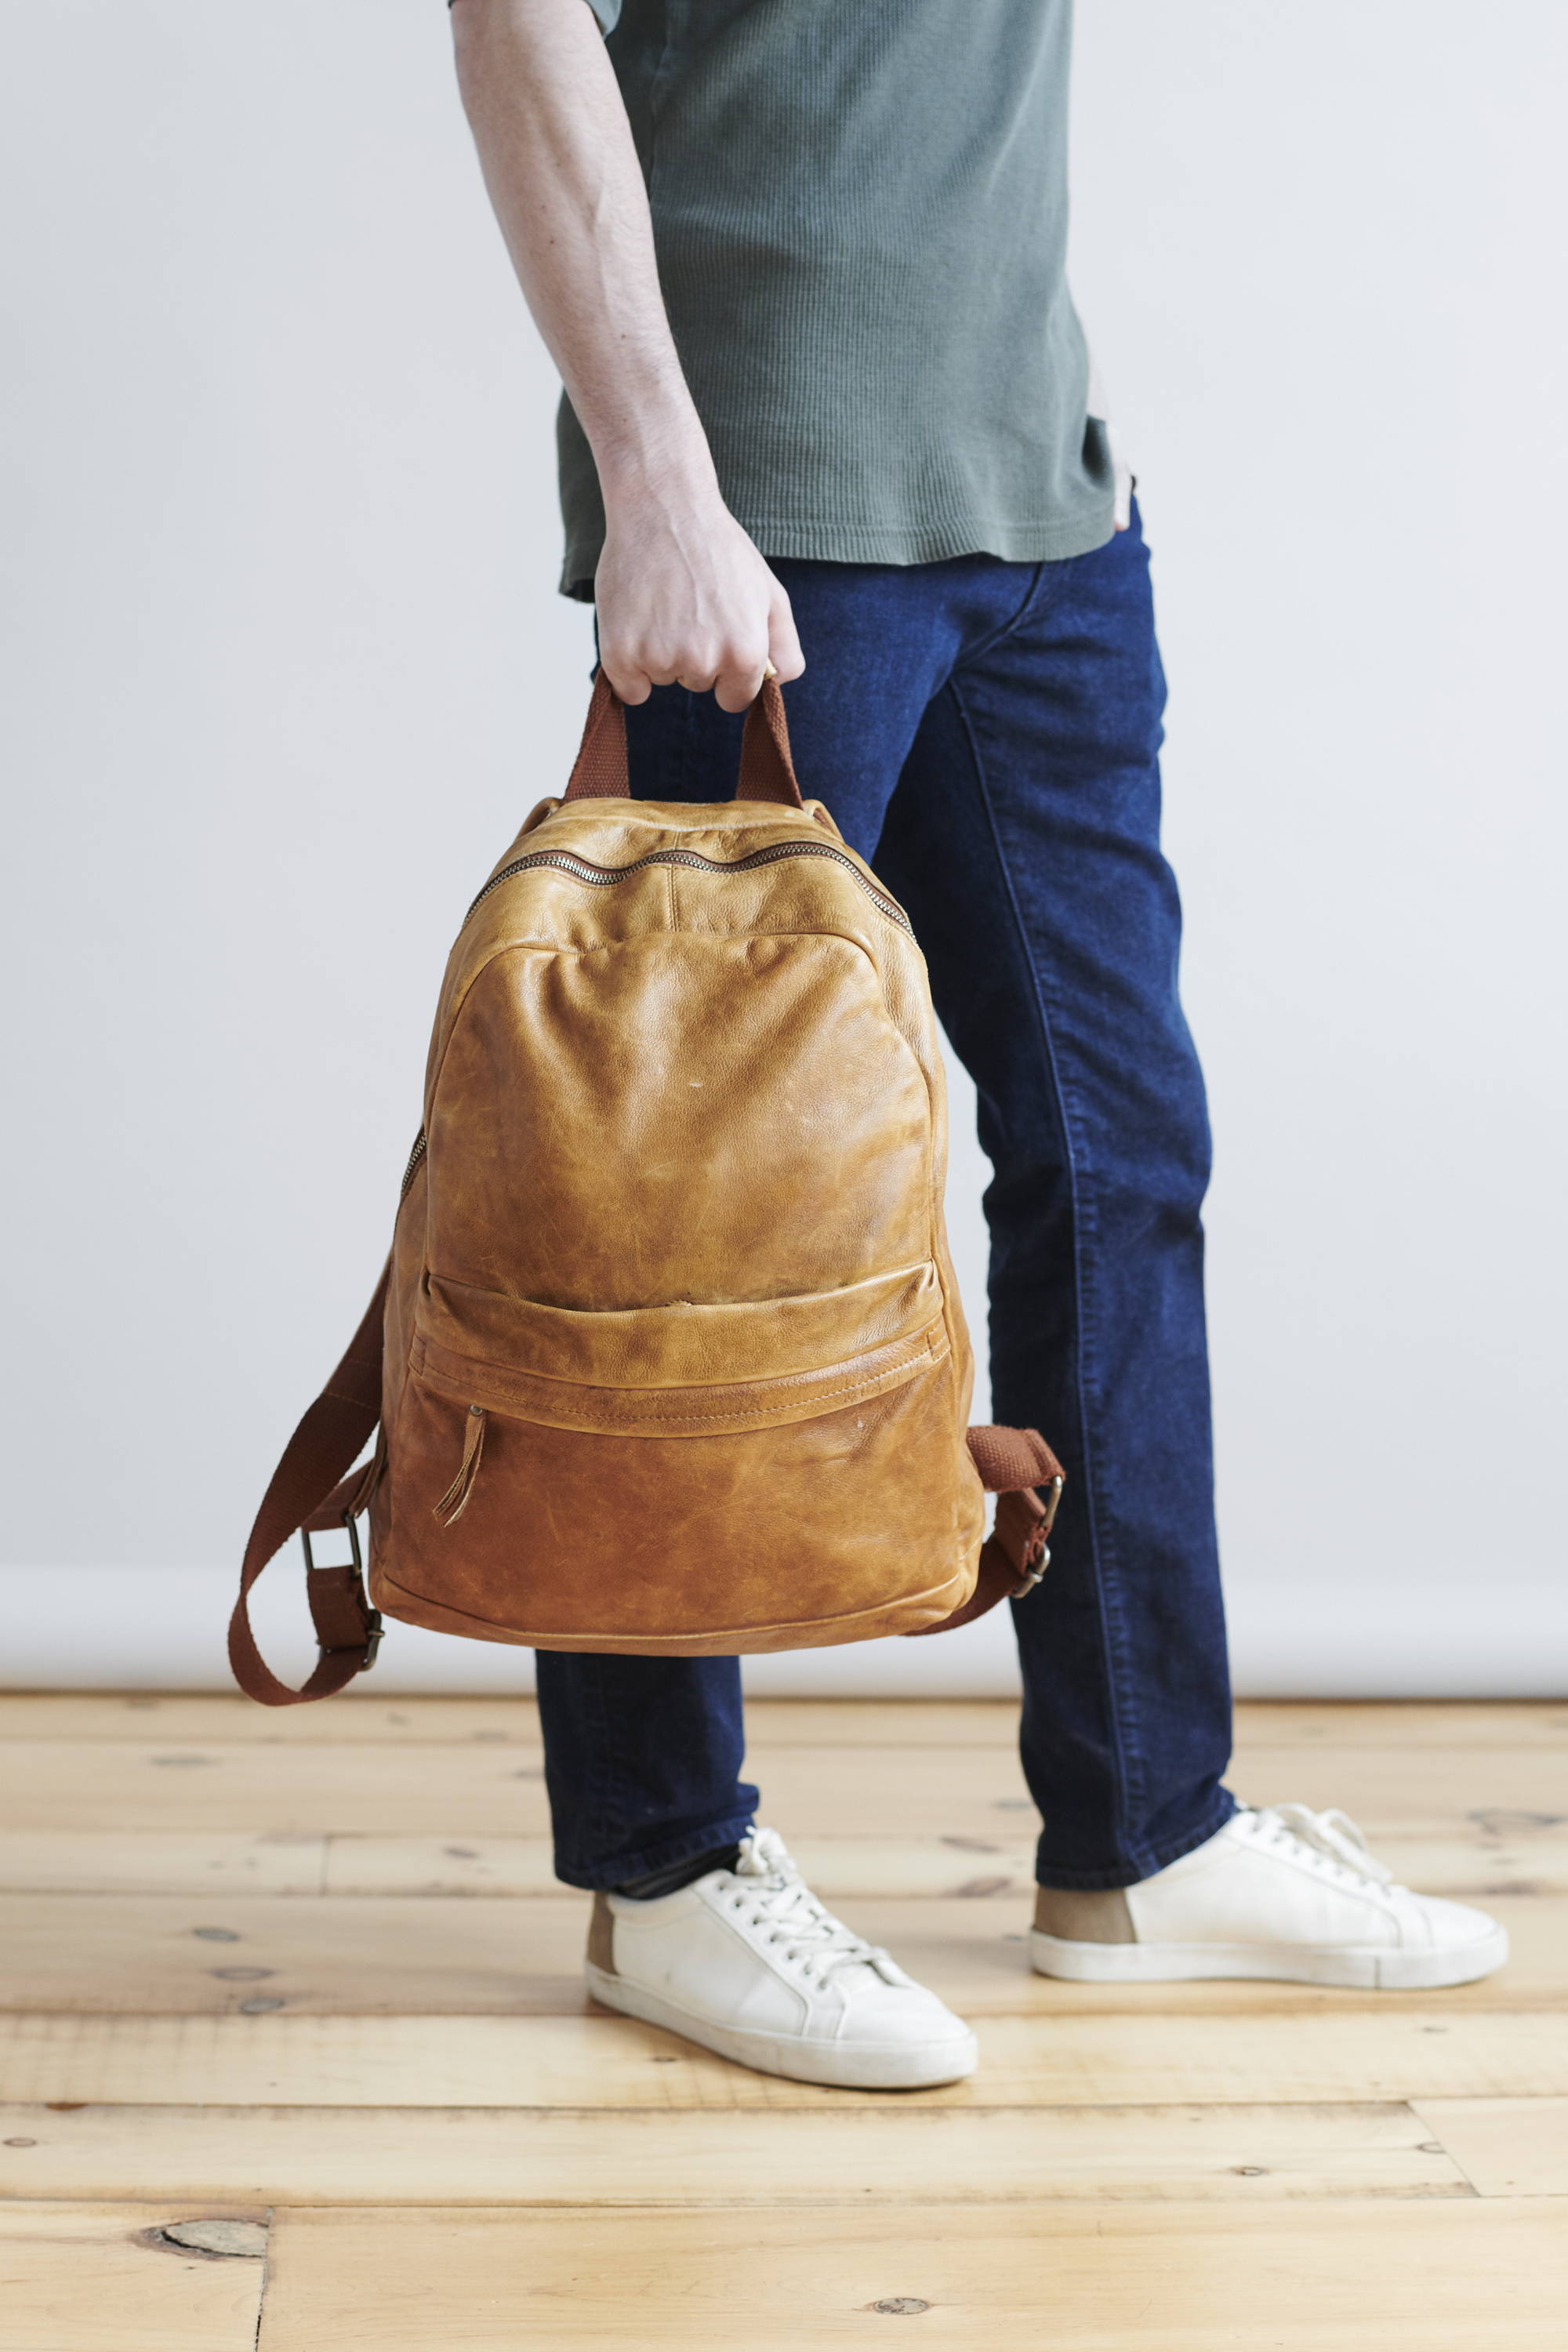 July 4th travel essentials latico leathers sheldon backpack